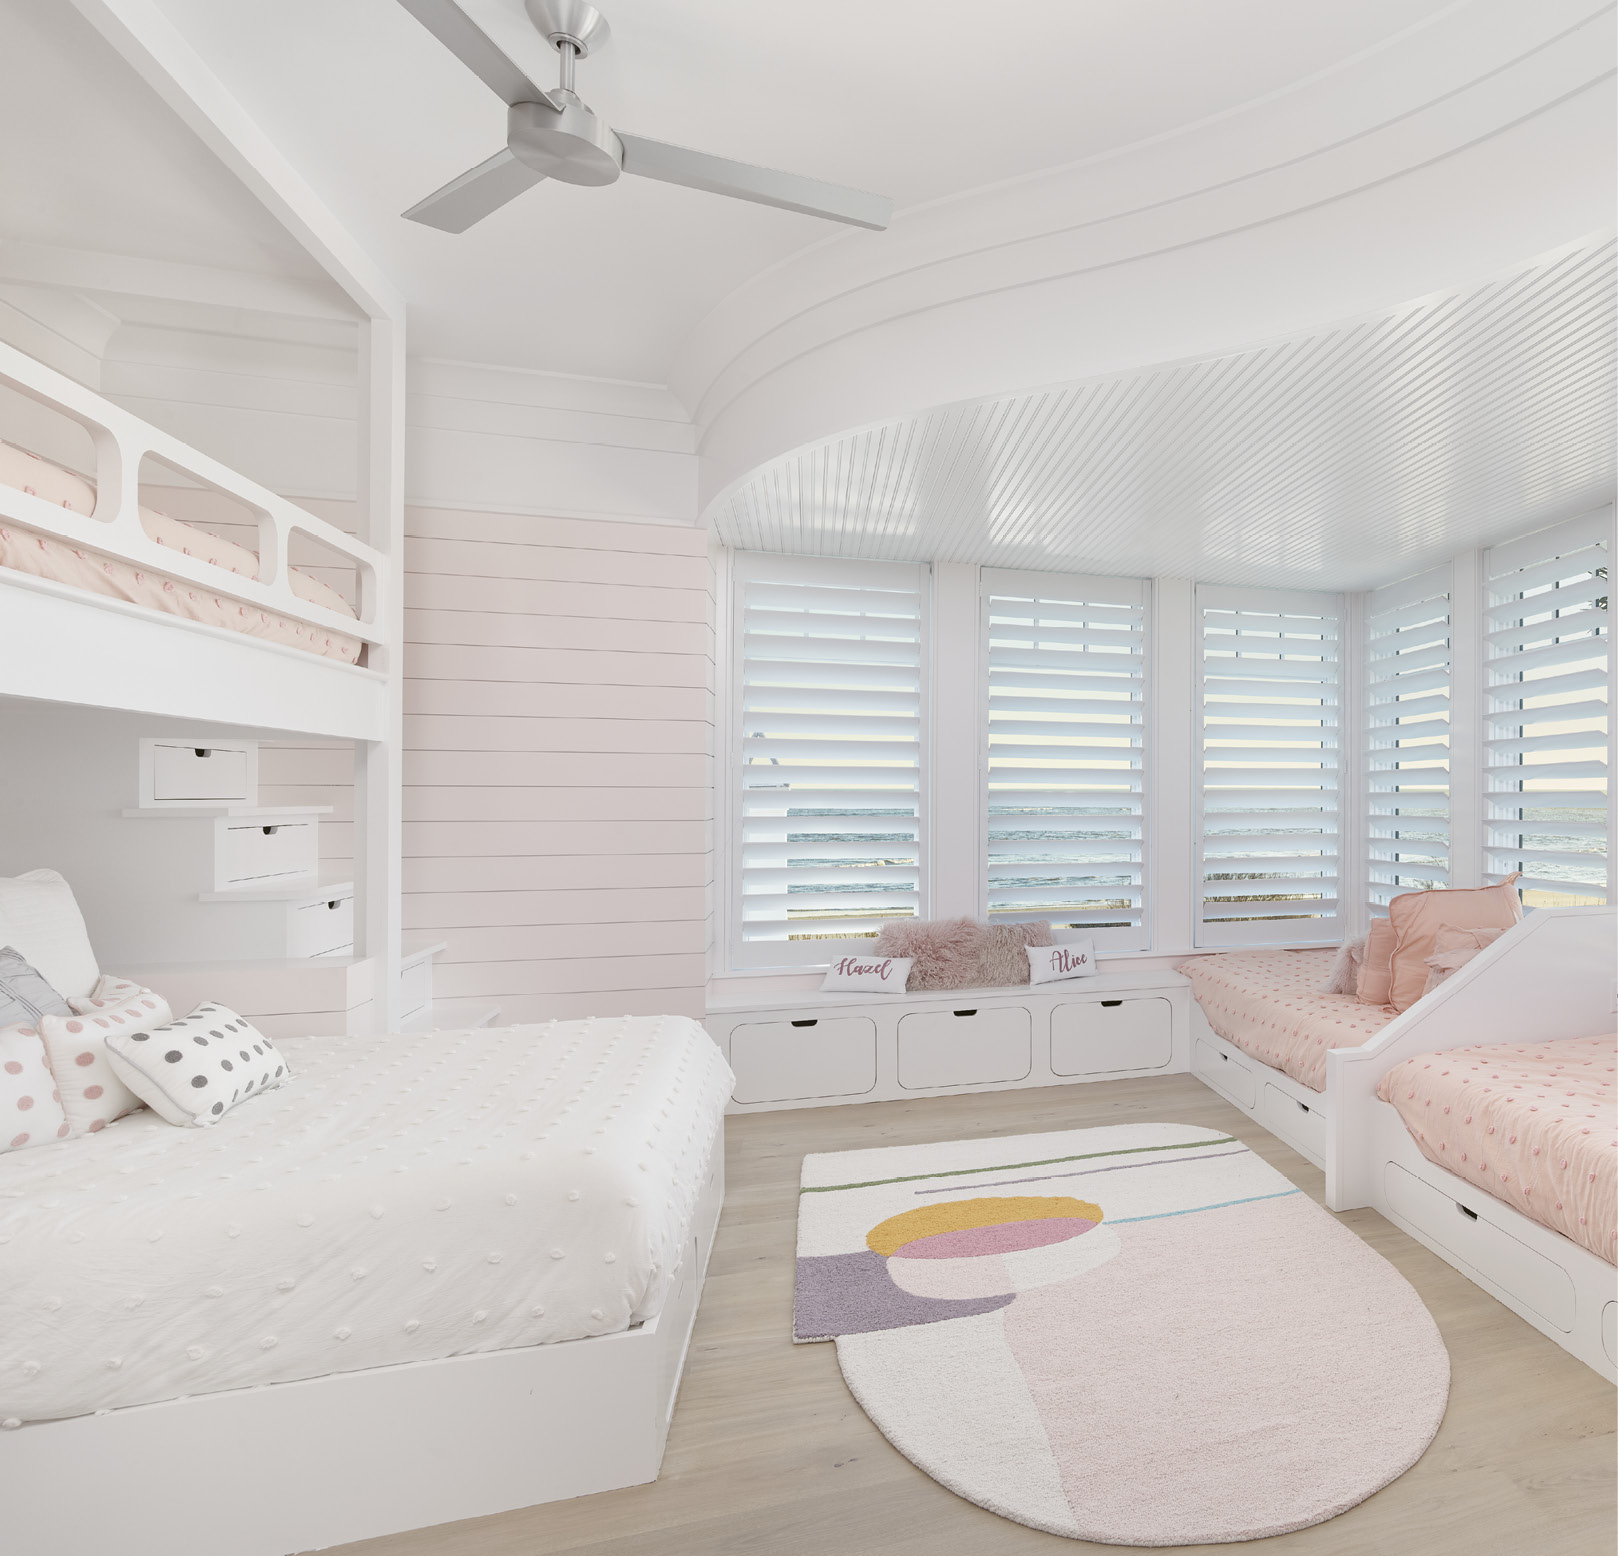 The girls’ bunk room repeats the serpentine soffits found in the downstairs wine room. It also features cutout details in the bunk railings and stairs with built-in storage in the risers. A queen bed allows the option of an adult joining in the sleepover.